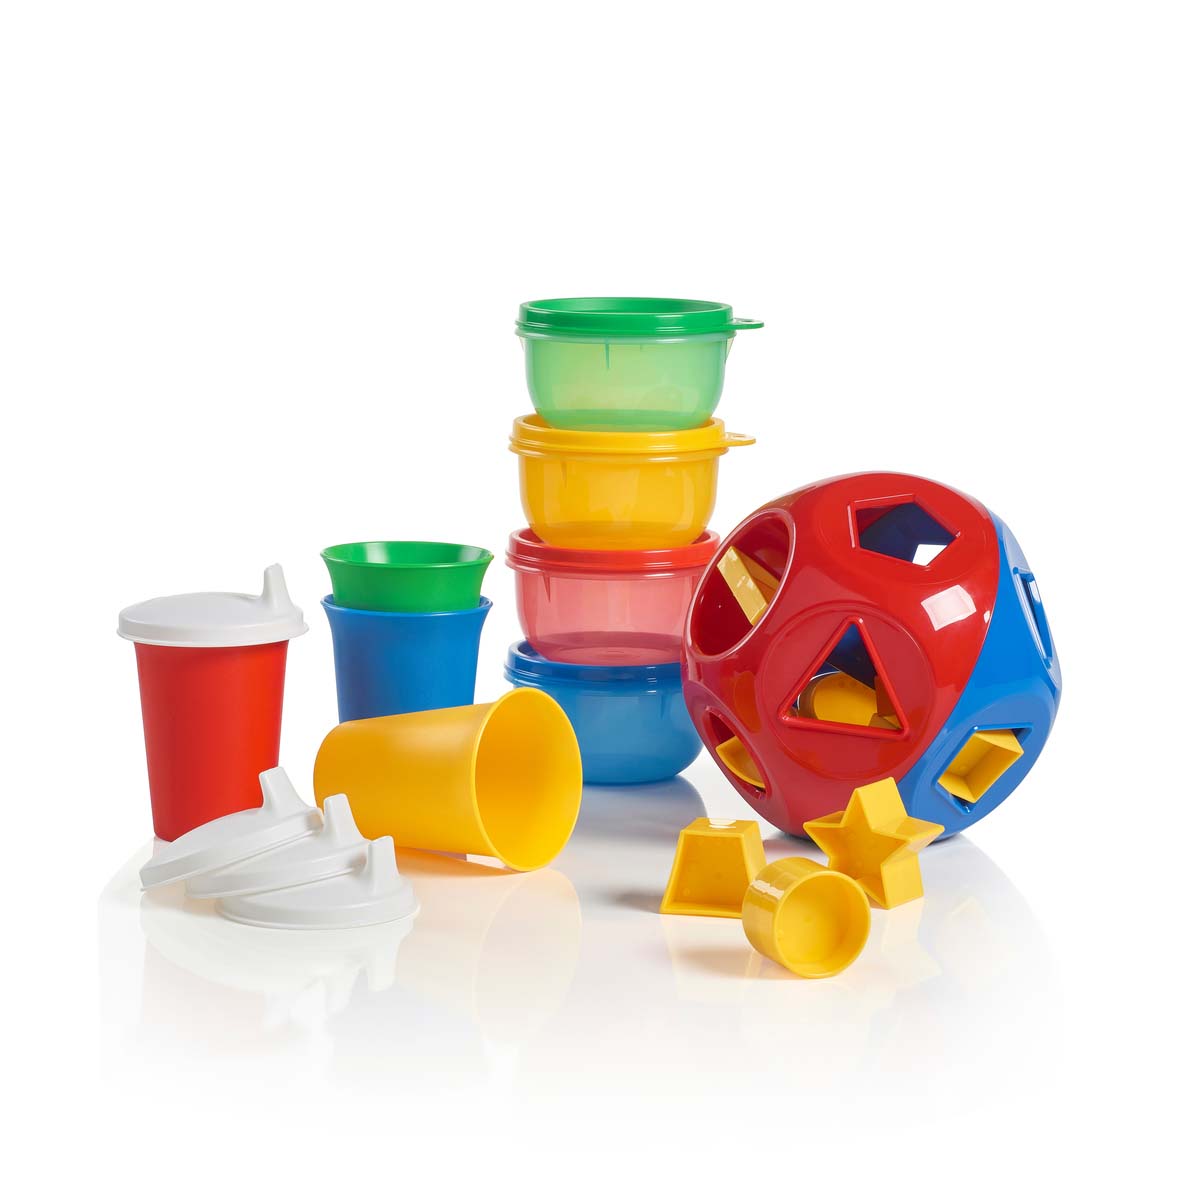 Playdate Playpack from Tupperware for the Holiday Gift Guide